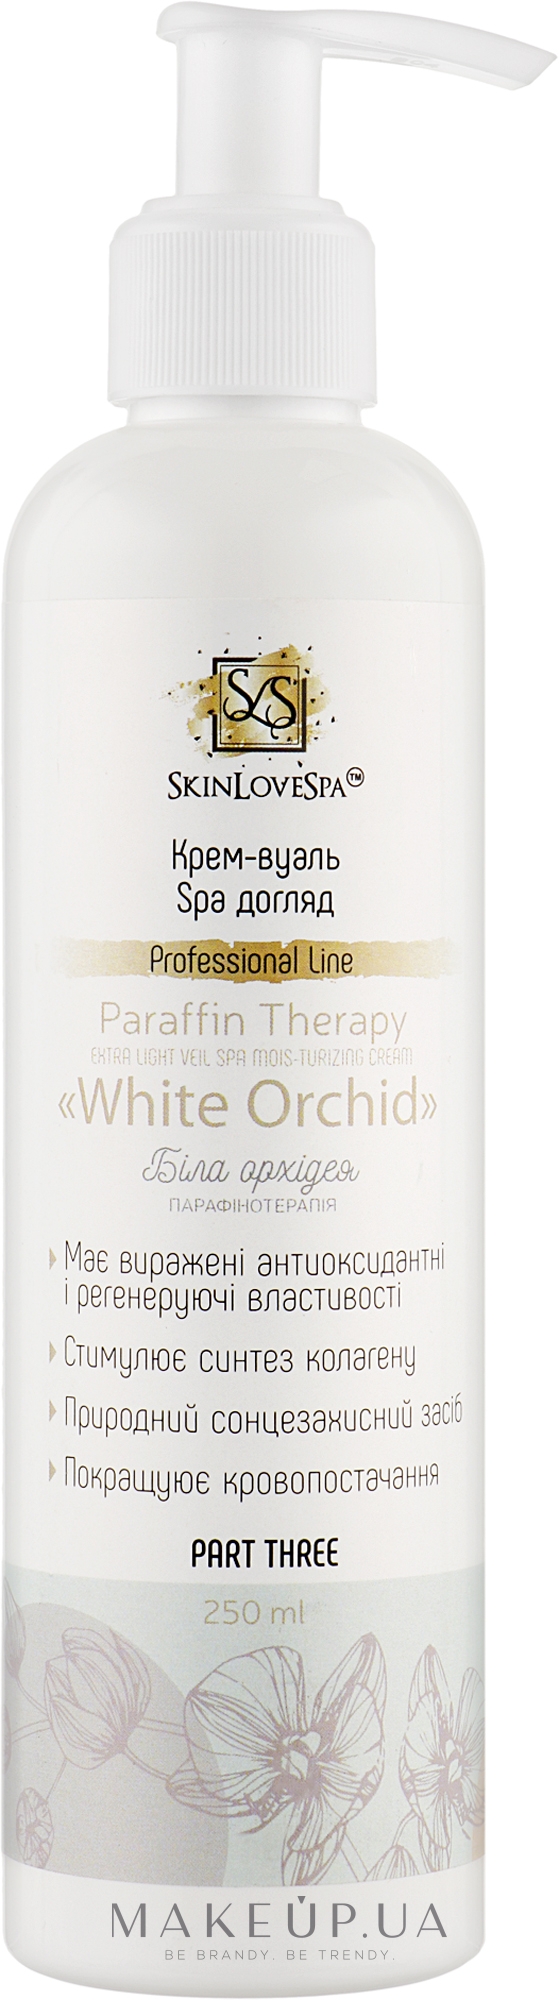 Крем-вуаль "White Orchid" - SkinLoveSpa Paraffin Therapy — фото 250ml